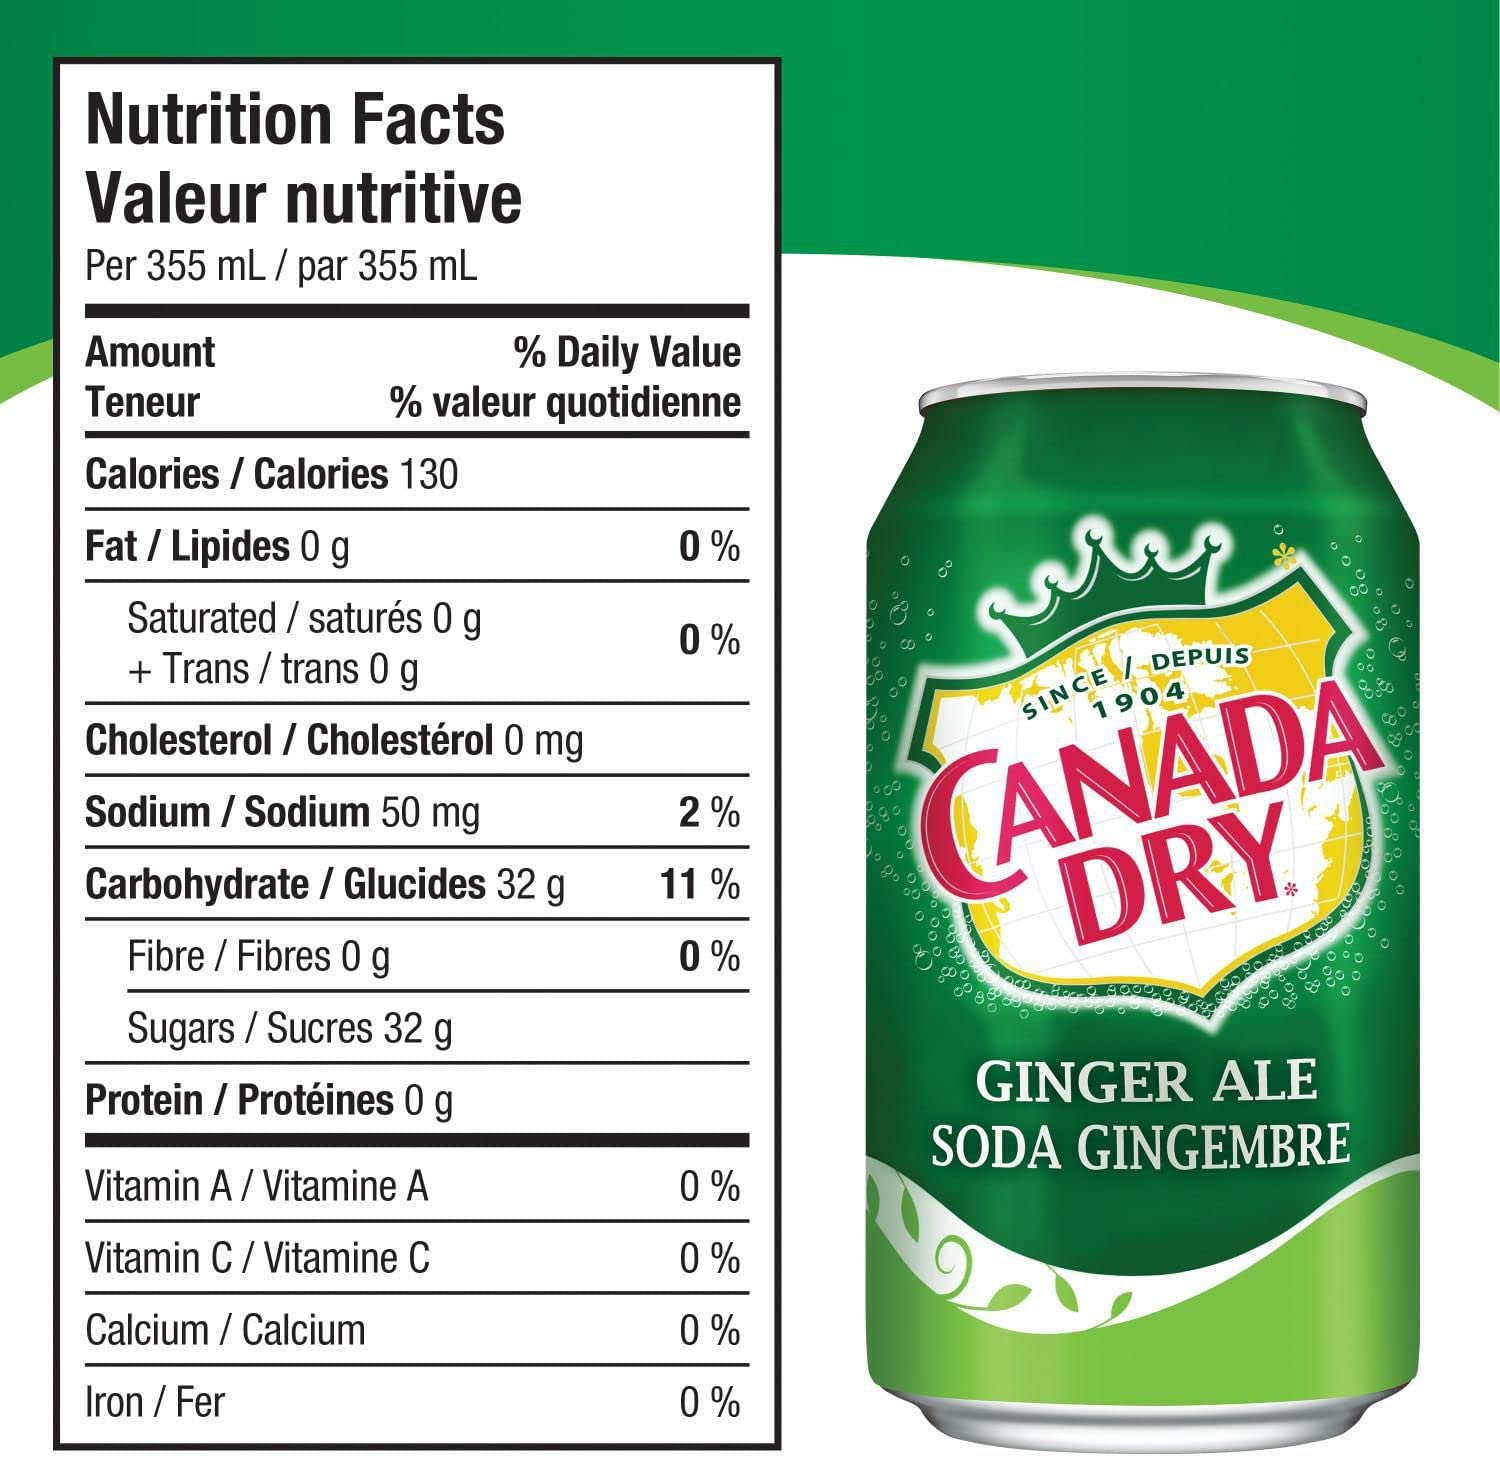 Canada Dry Ginger Ale Fridge Pack Cans, 355 mL, 3 Pack - image 5 of 11